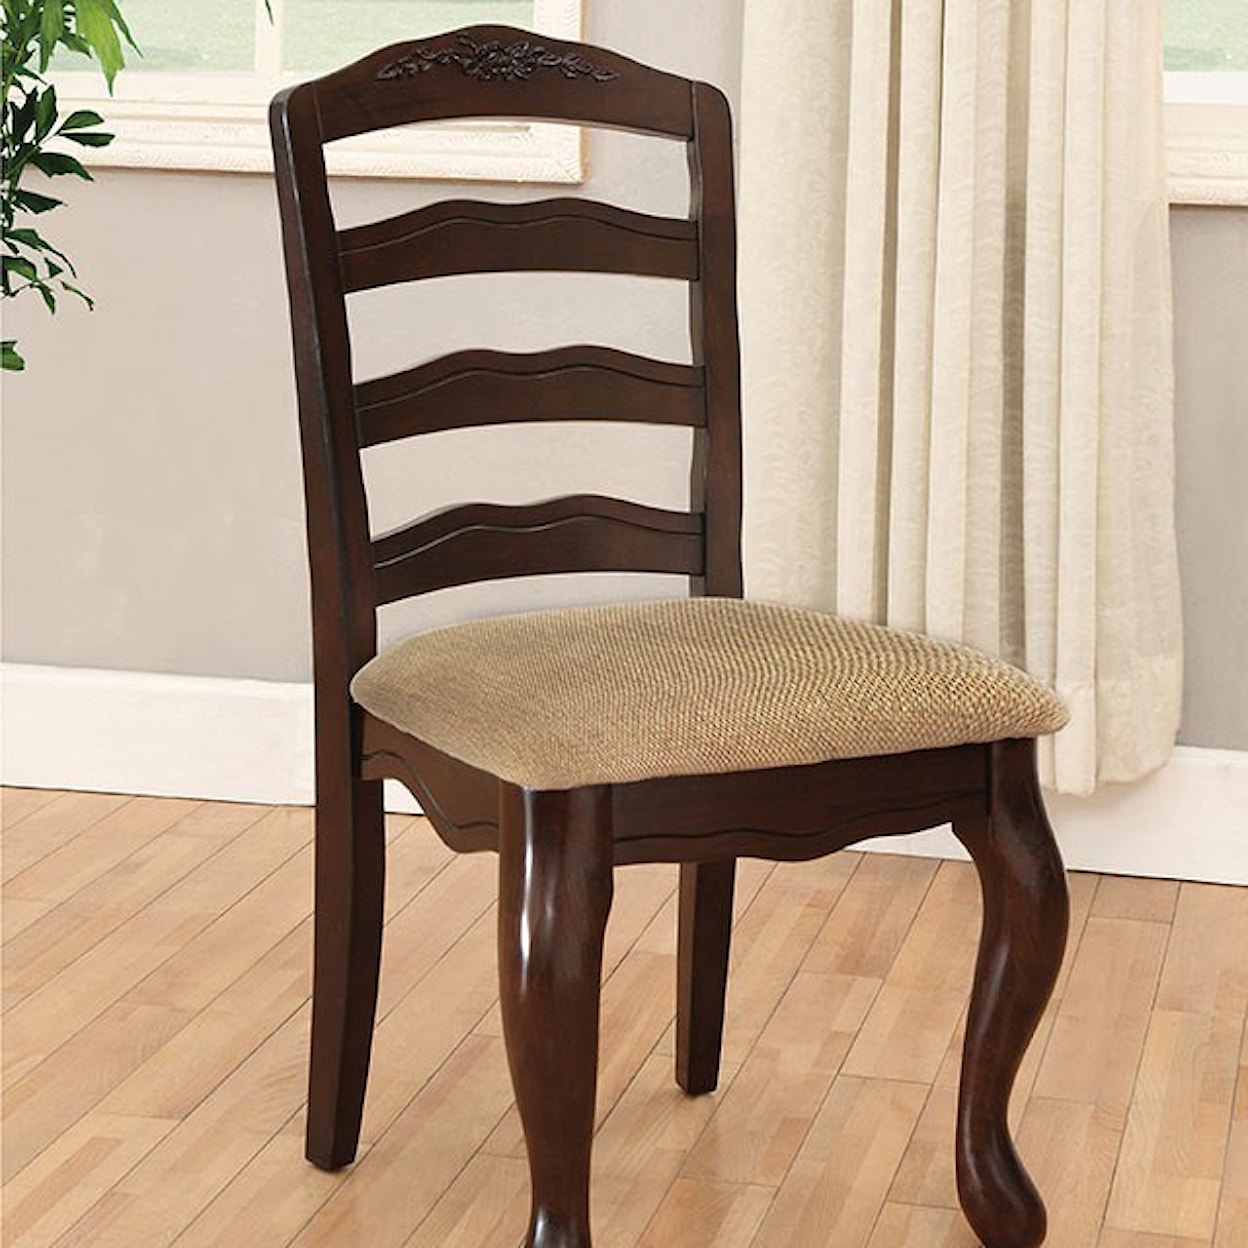 FUSA Townsville Set of 2 Side Chairs